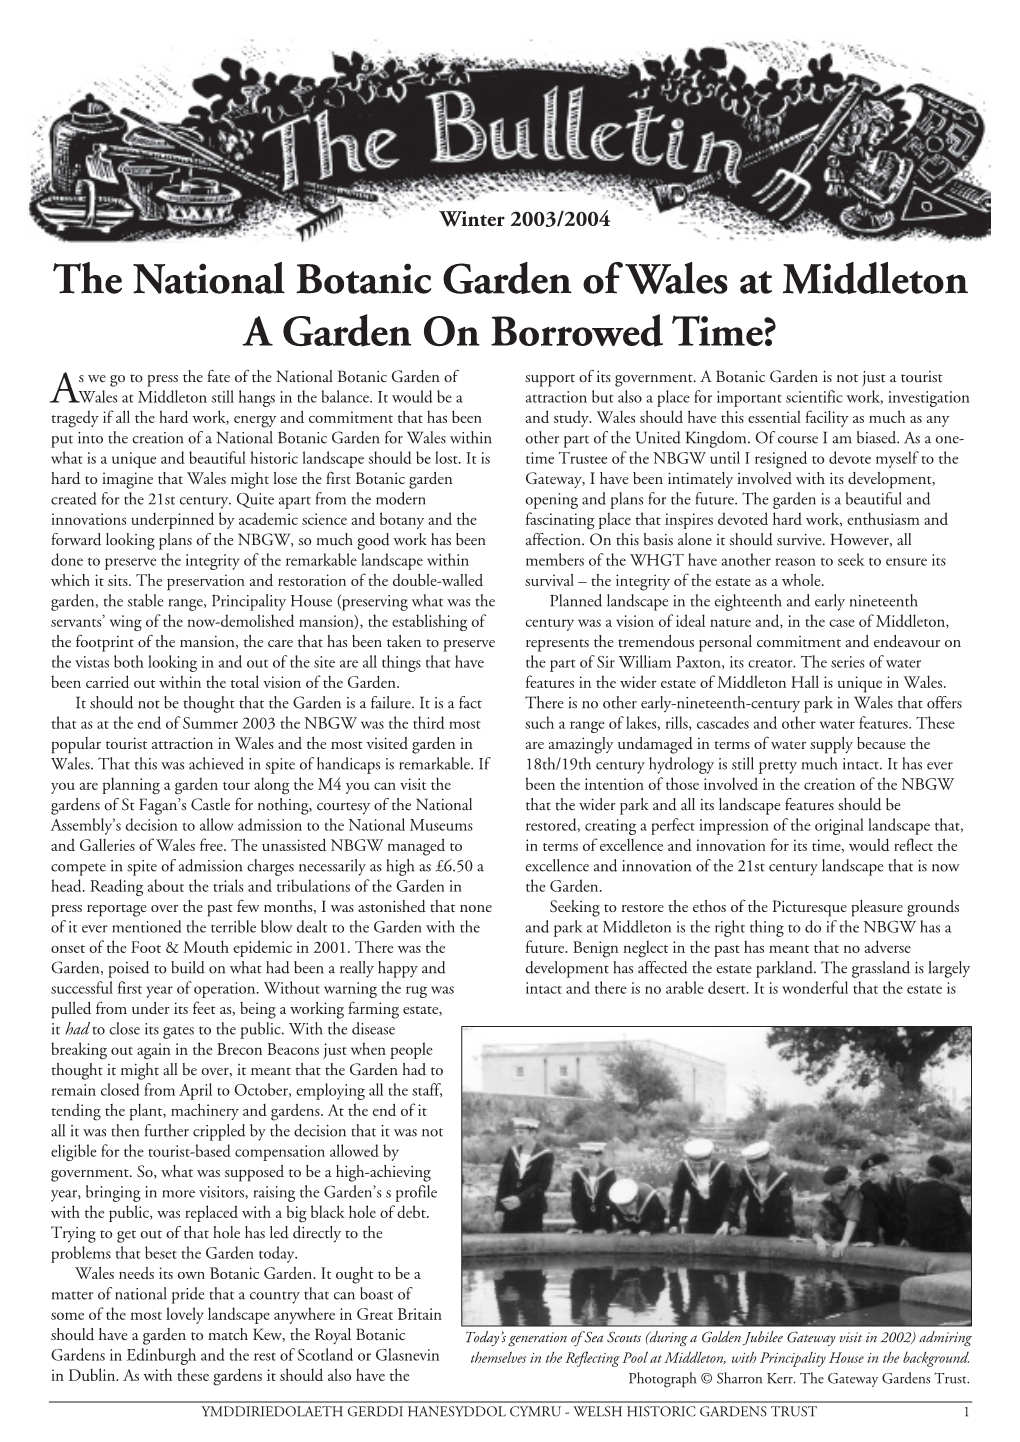 The National Botanic Garden of Wales at Middleton a Garden on Borrowed Time?